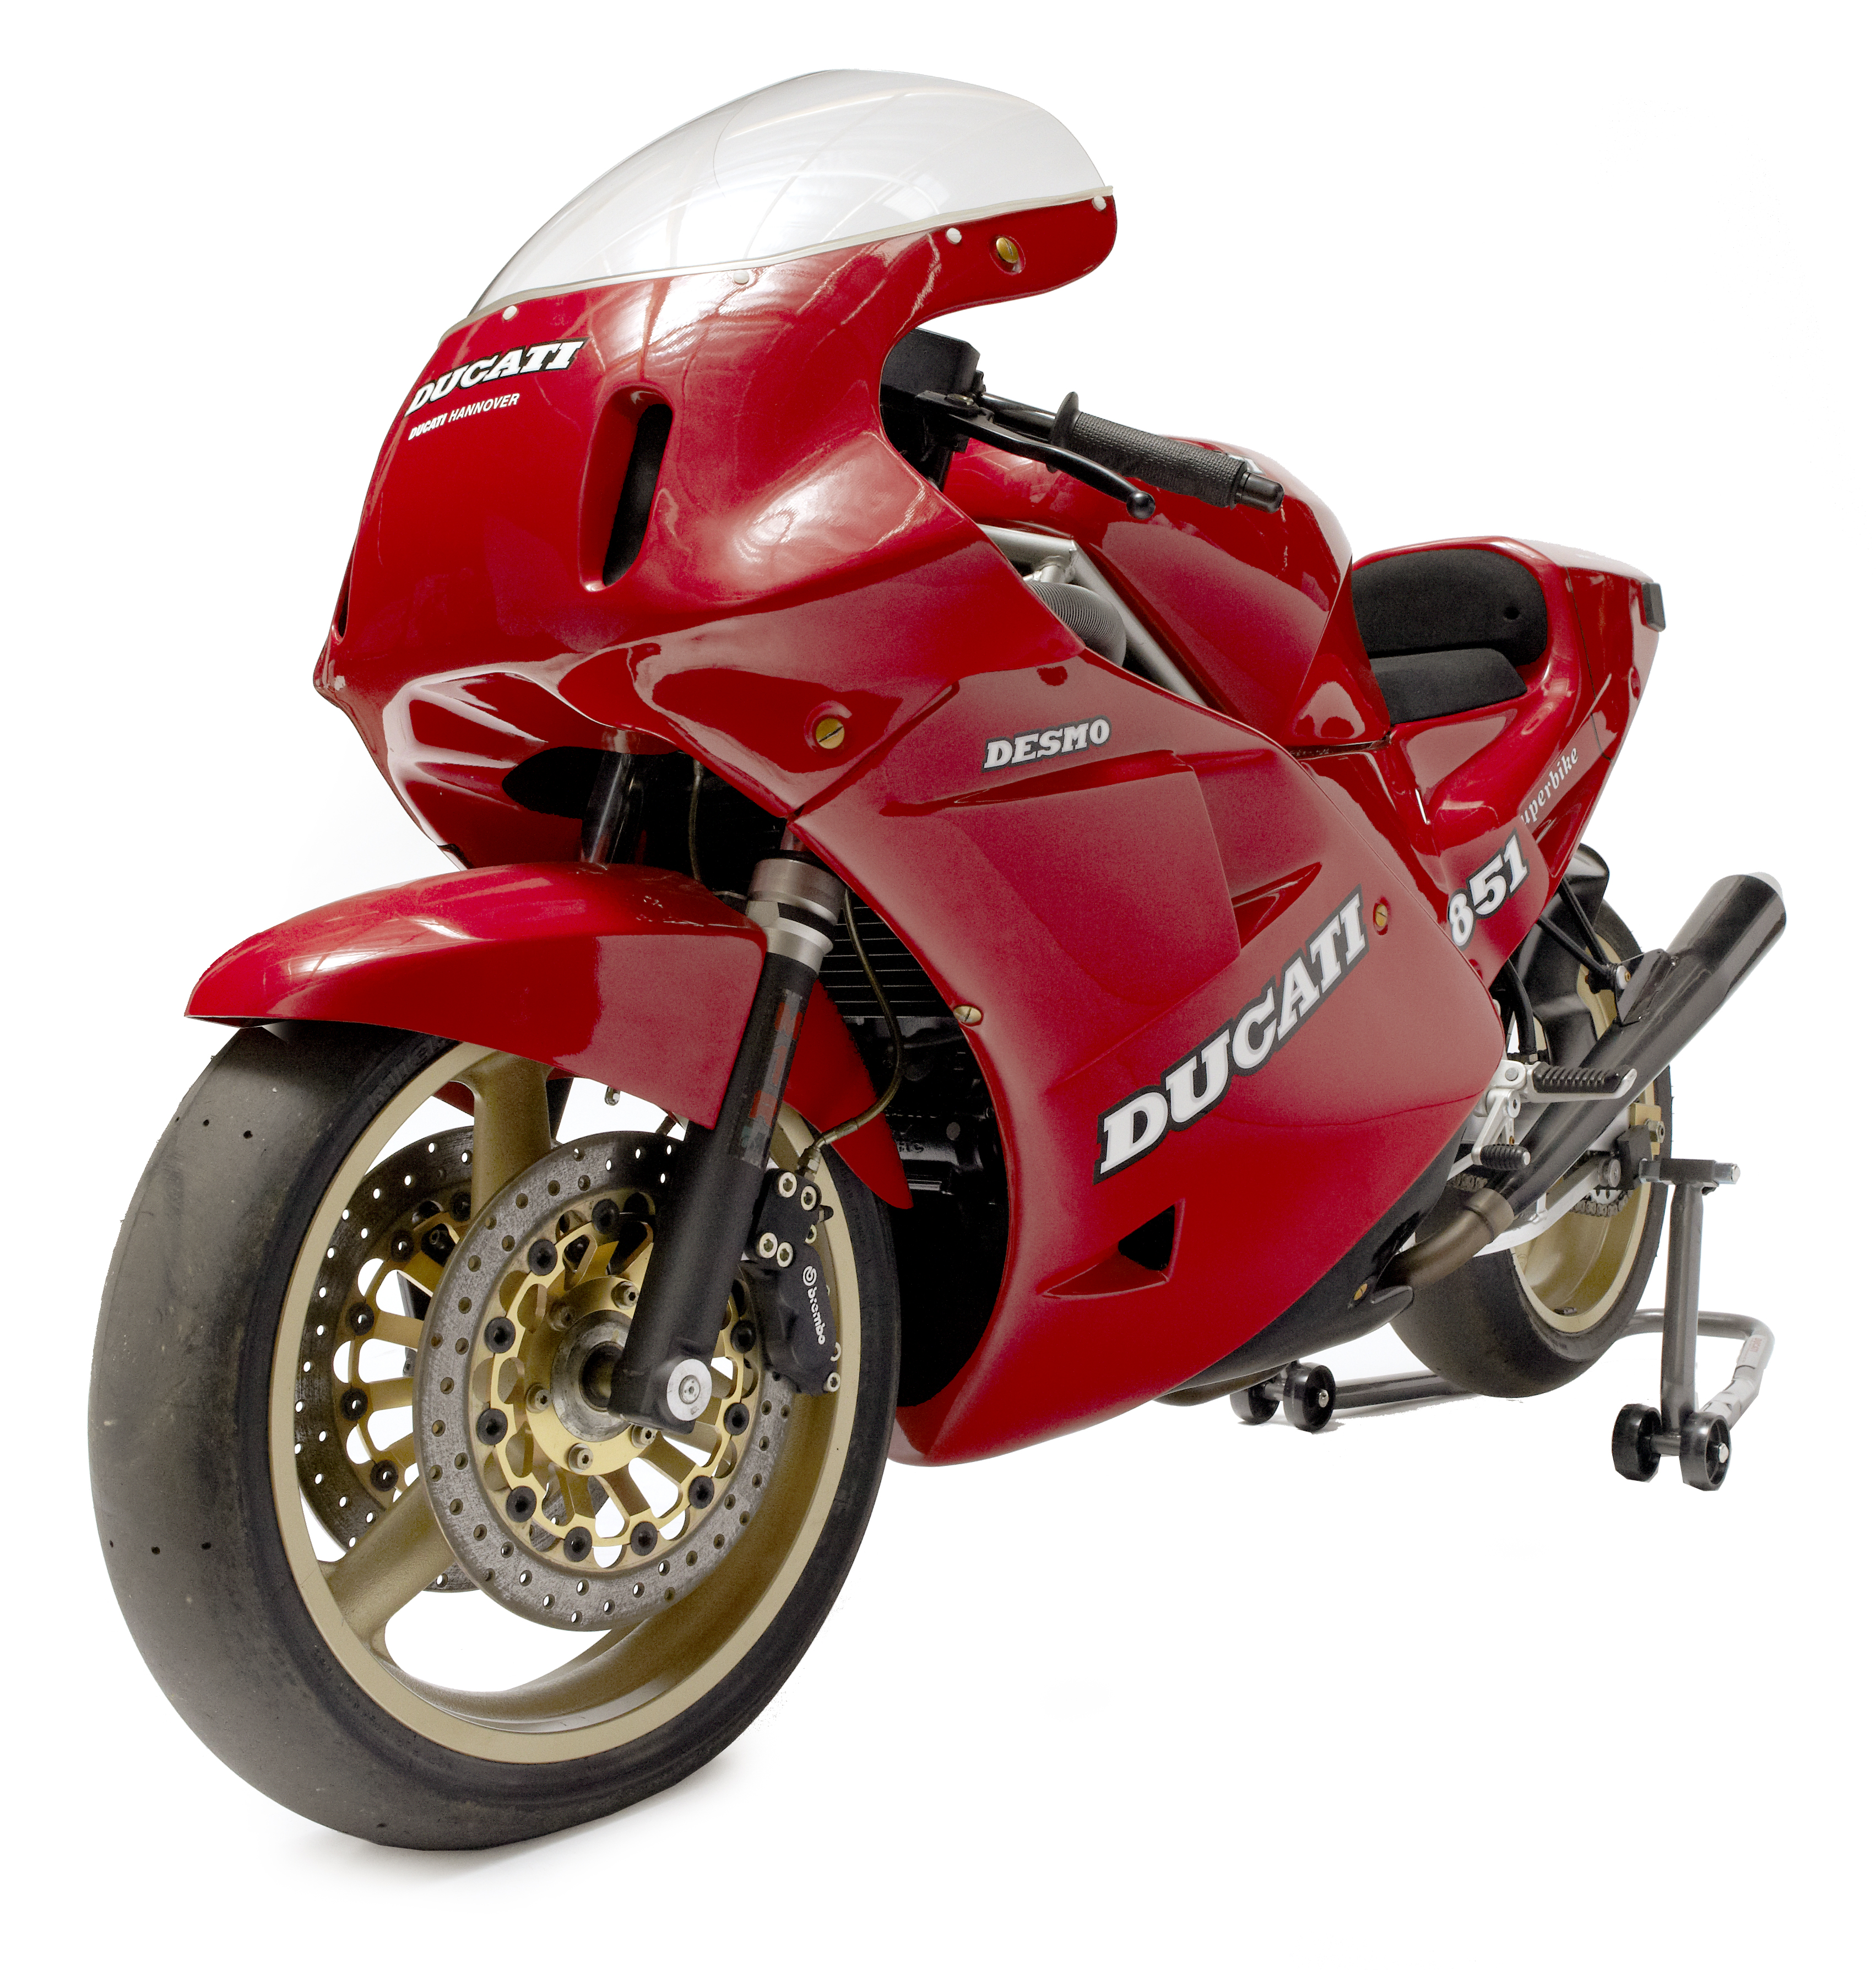 Ultra-rare Ducati collection up for auction